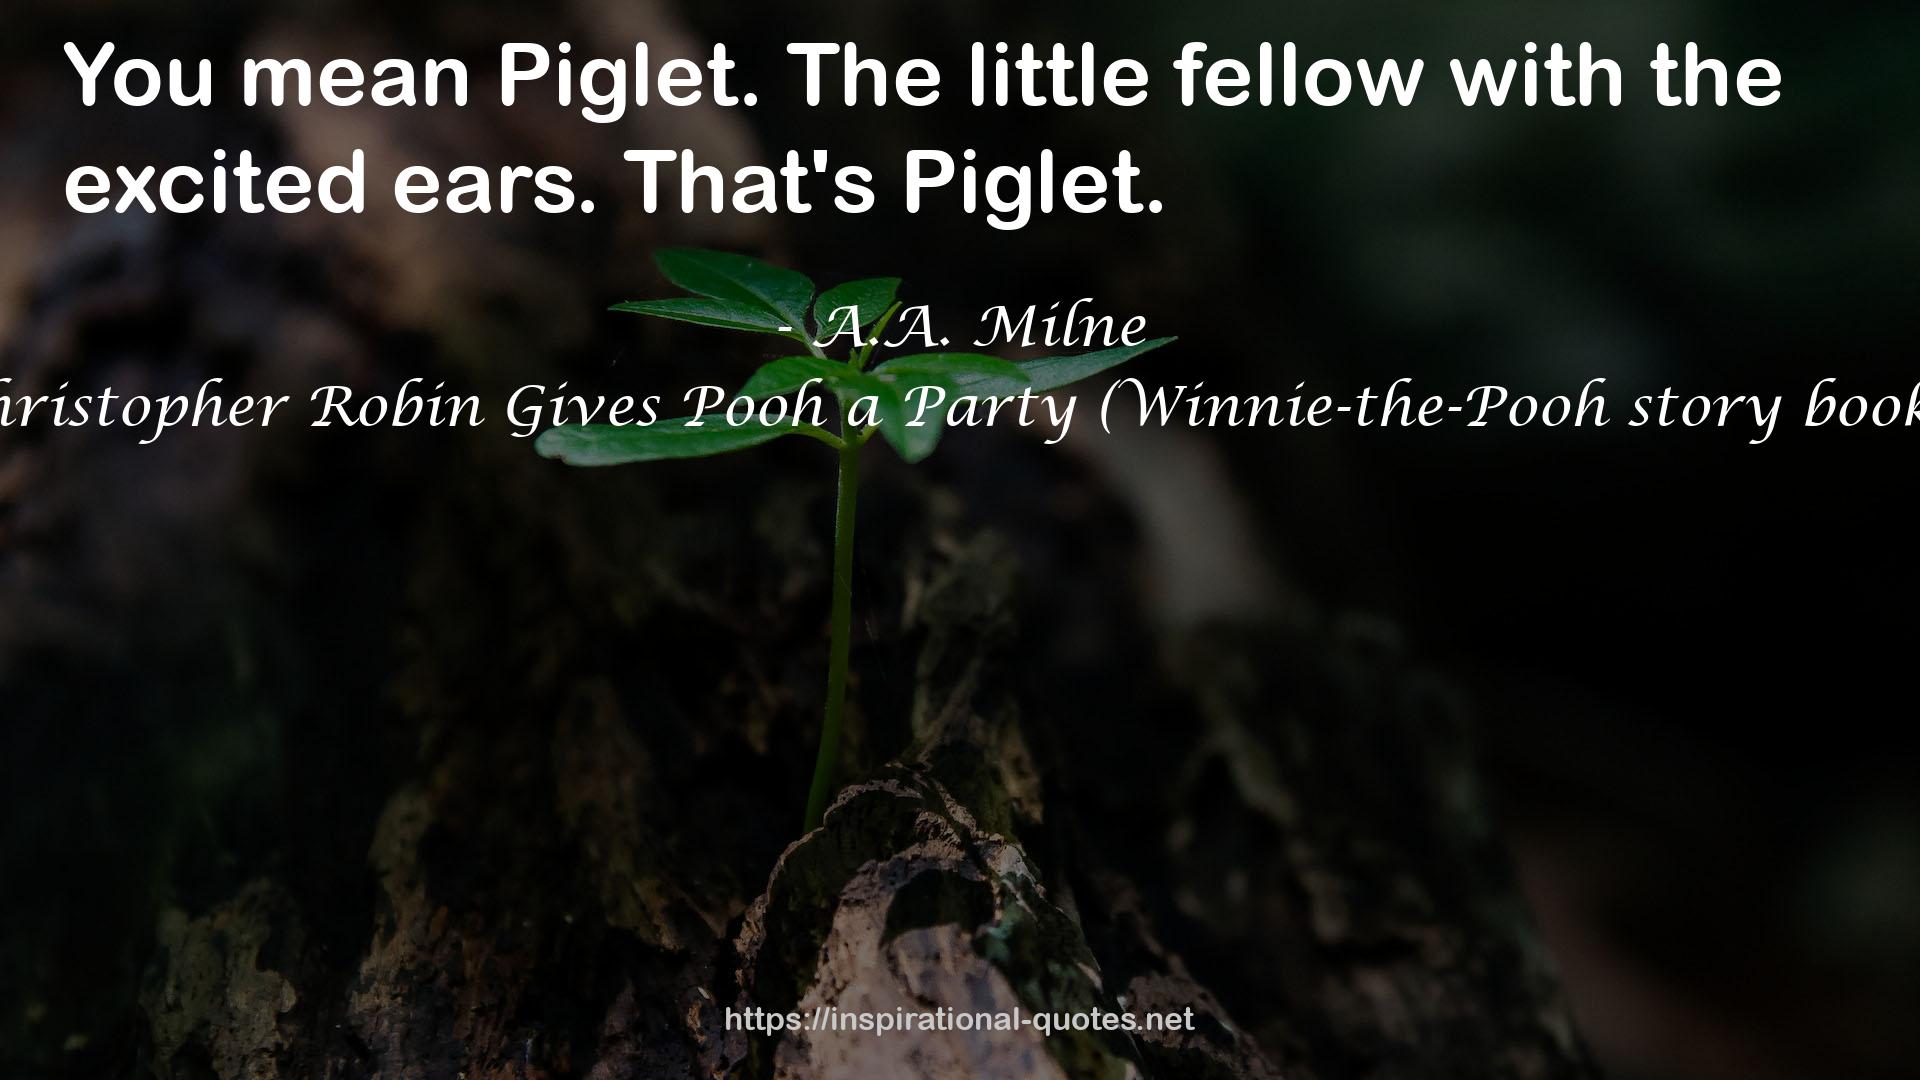 Christopher Robin Gives Pooh a Party (Winnie-the-Pooh story books) QUOTES